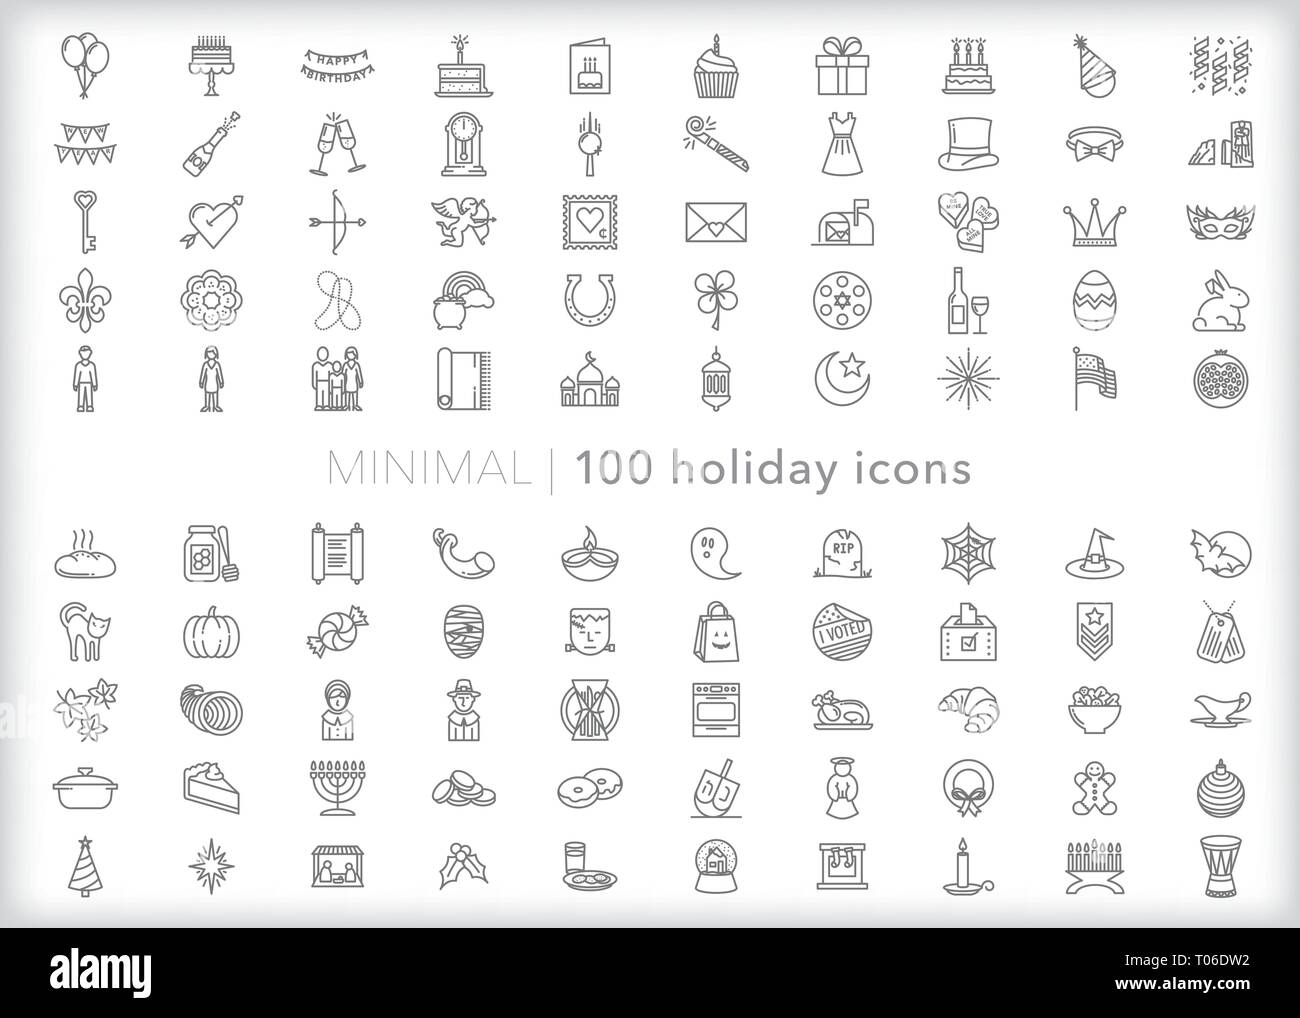 Set of 100 holiday icons spanning the calendar year including New Year's, Valentine's Day, Halloween, Thanksgiving, Christmas, Kwanzaa Stock Vector